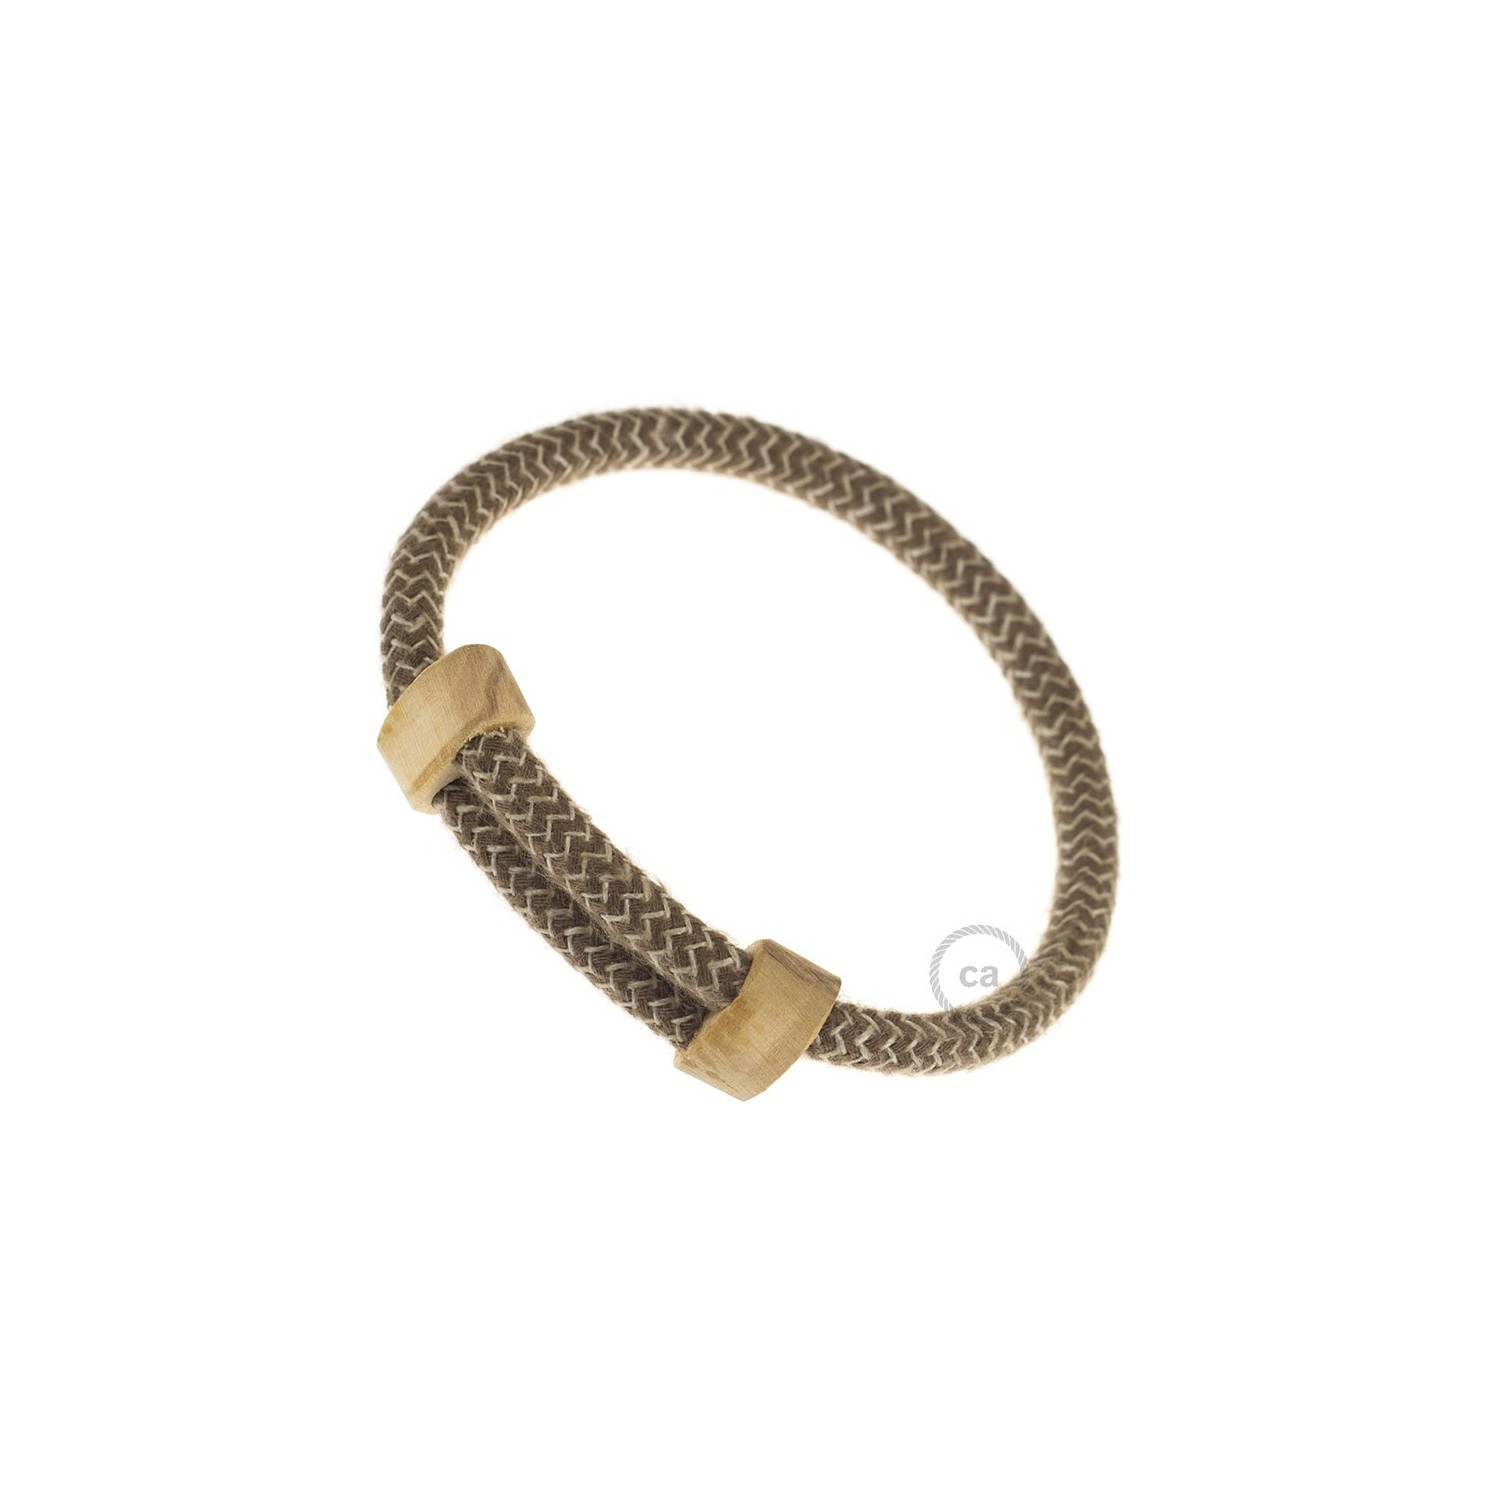 Creative-Bracelet in Cotton and Natural Linen Bark RD73. Wood sliding fastening. Made in Italy.